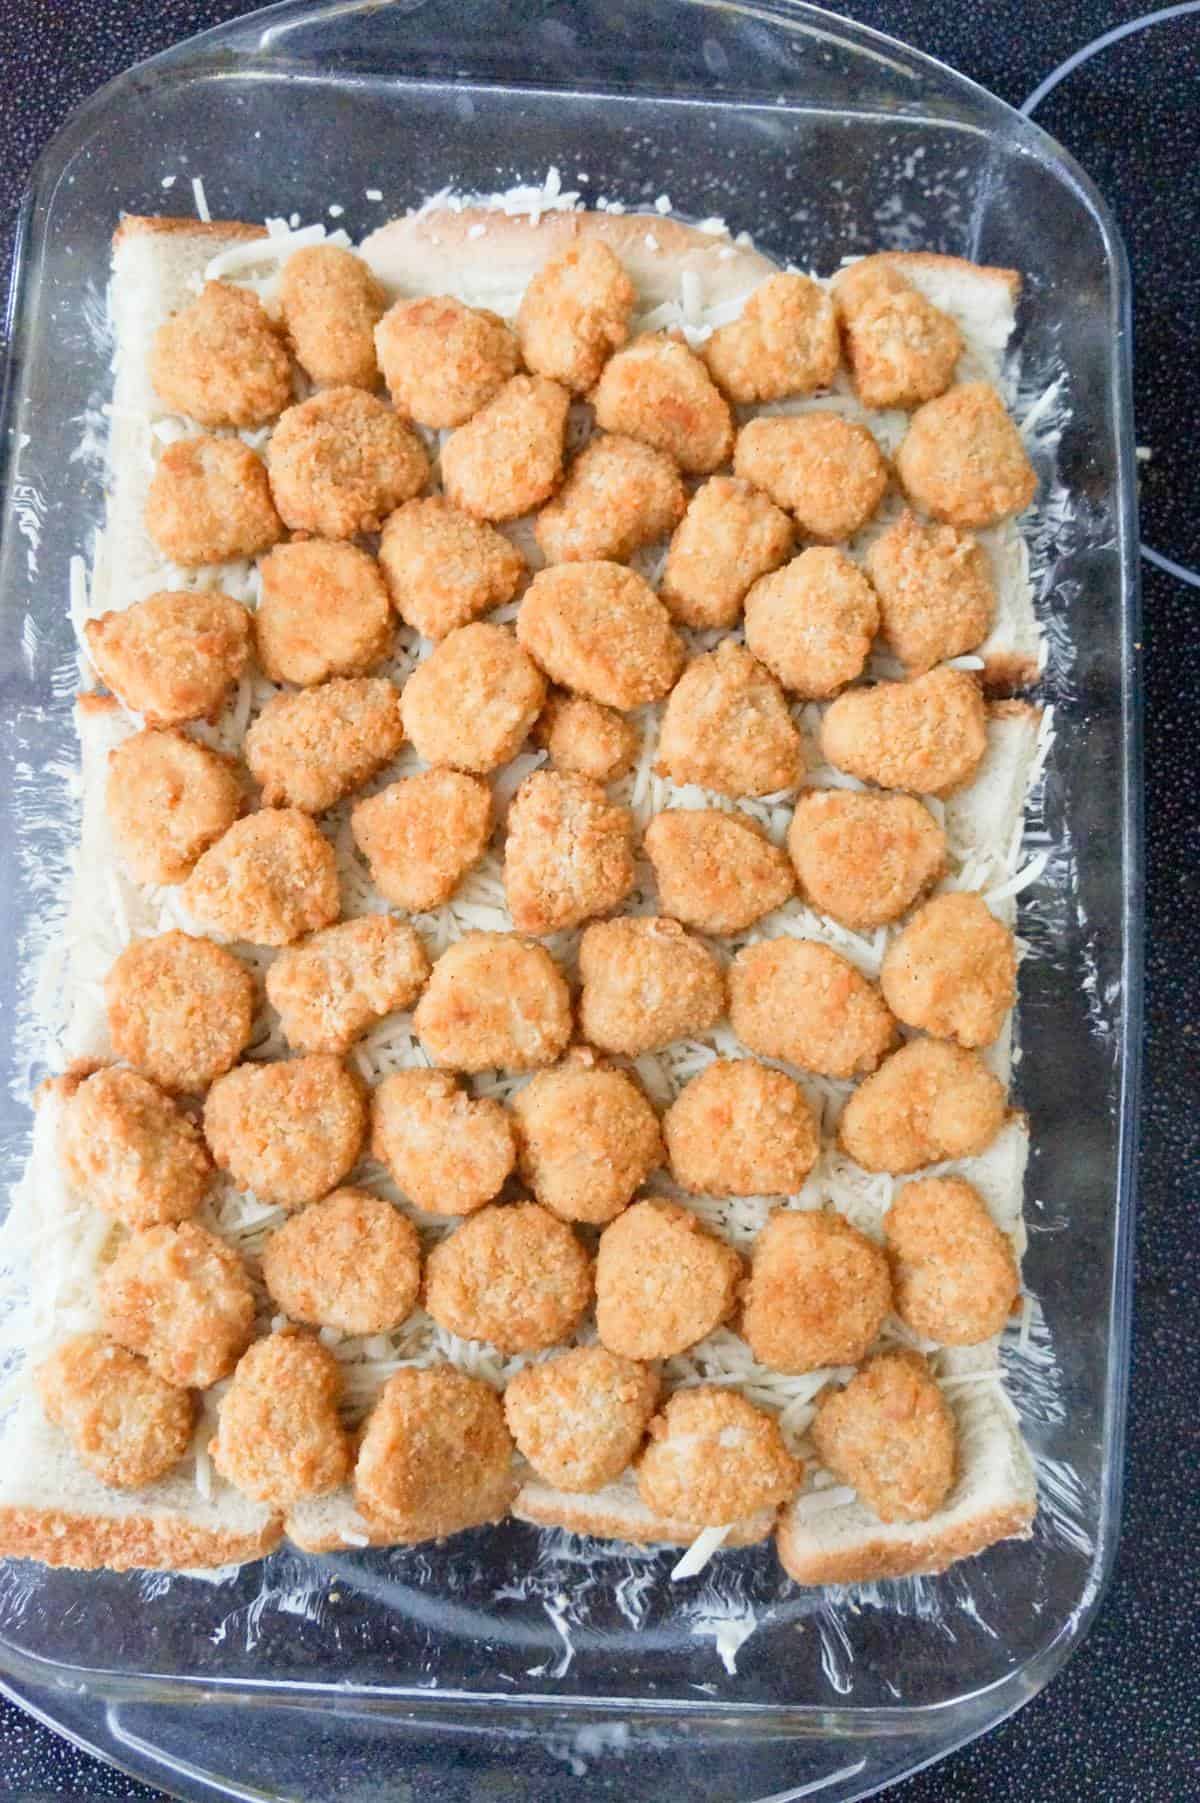 popcorn chicken and shredded cheese on top of bread in a baking dish